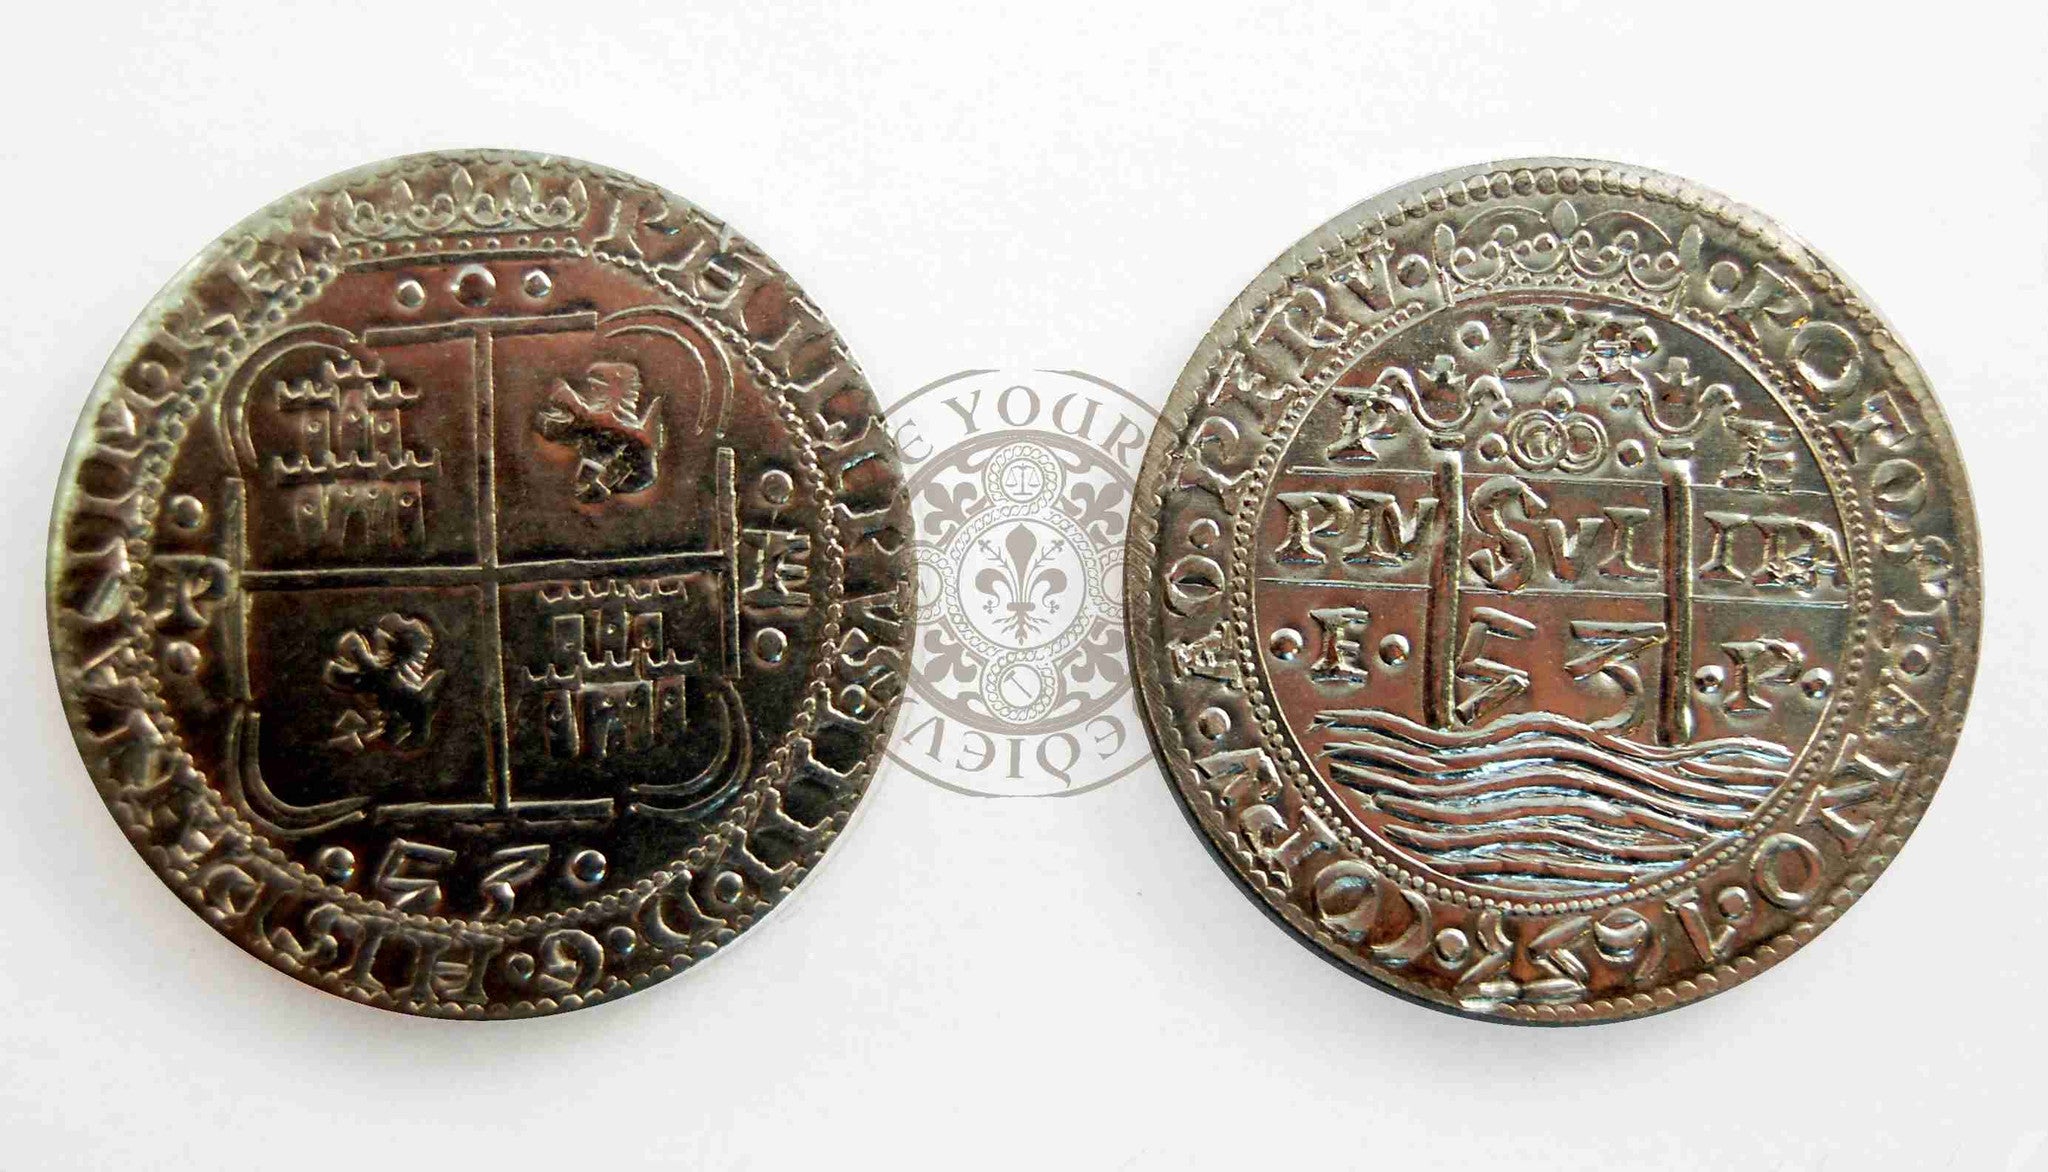 pirates of the caribbean coins